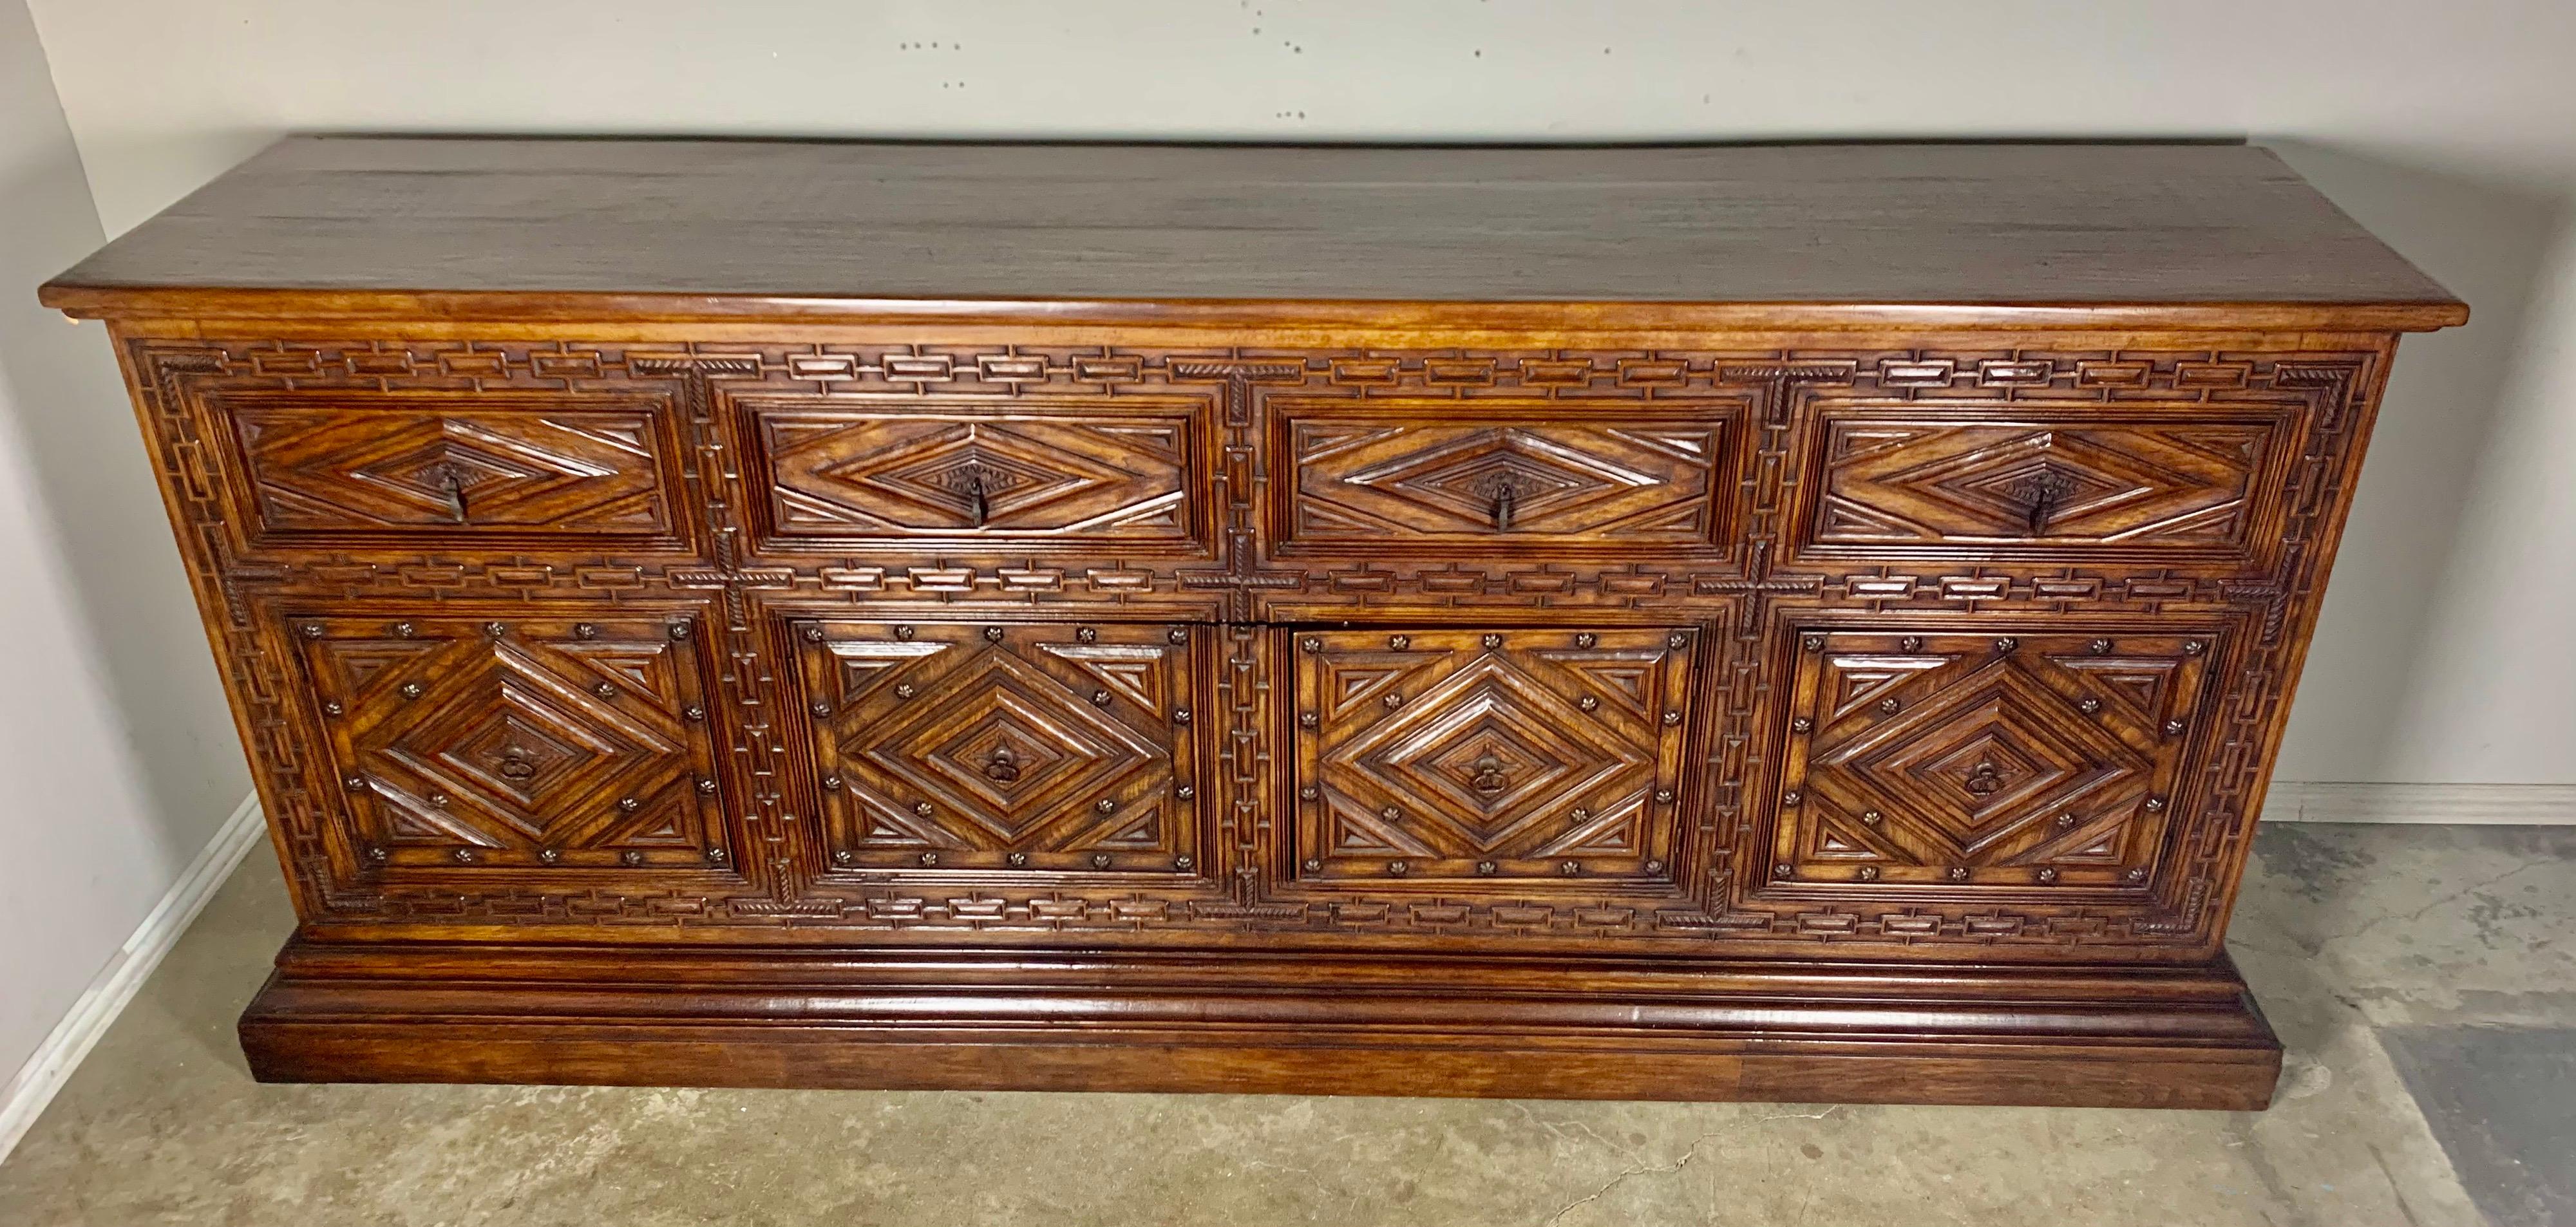 Heavily carved Italian walnut sideboard with great storage underneath including four drawers on top and drawers that were added on the inside of the doors. Iron hardware.